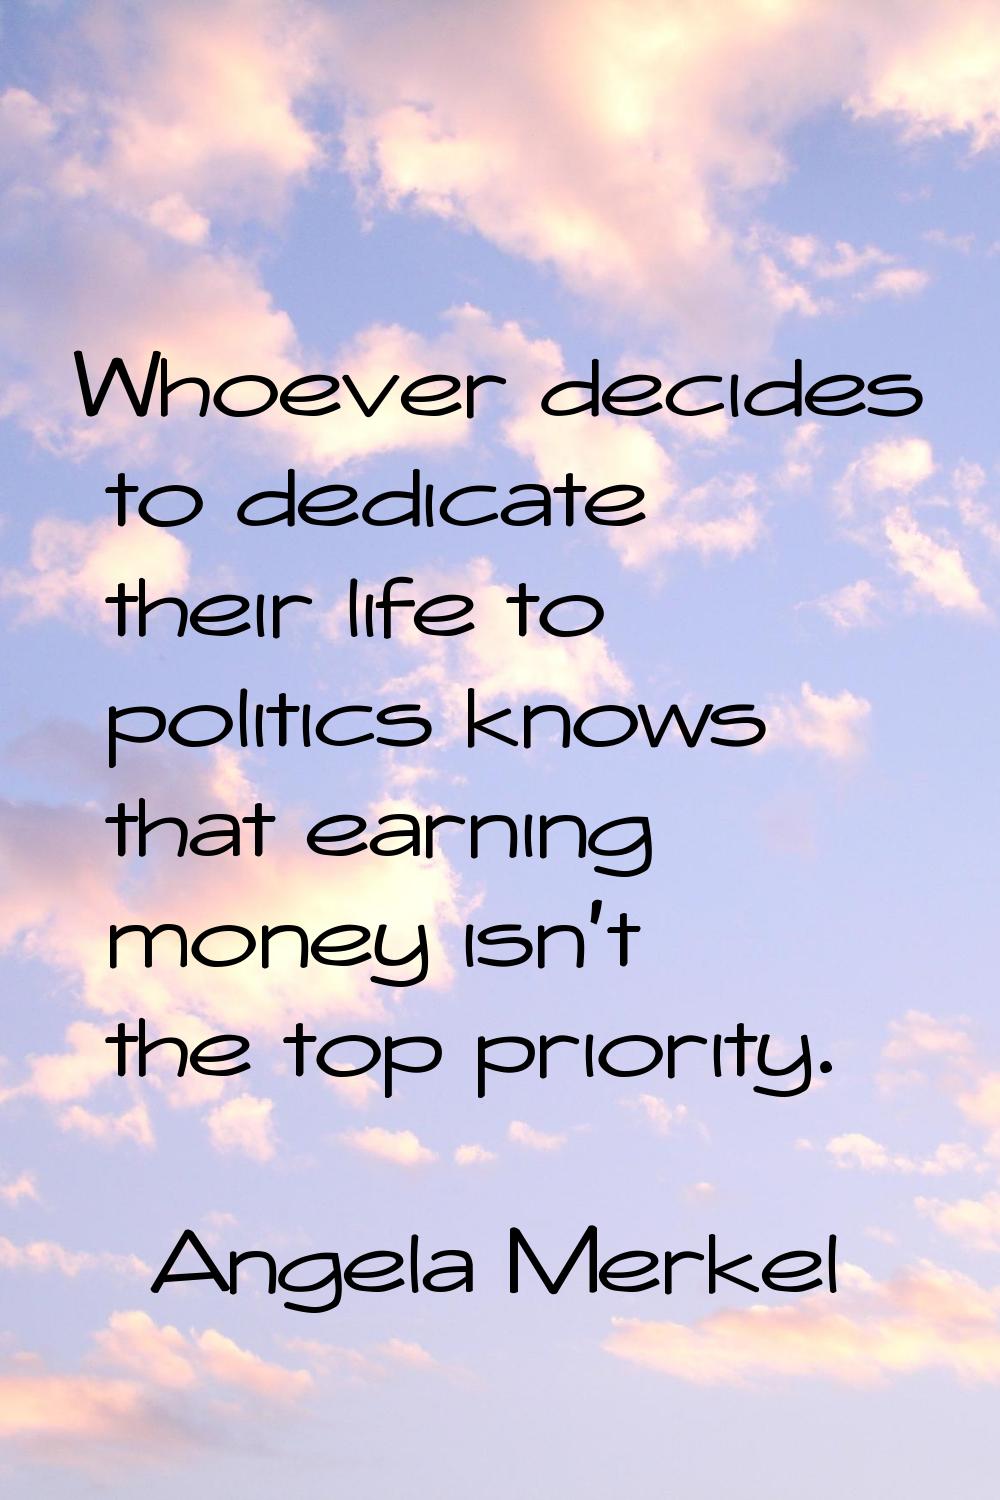 Whoever decides to dedicate their life to politics knows that earning money isn't the top priority.